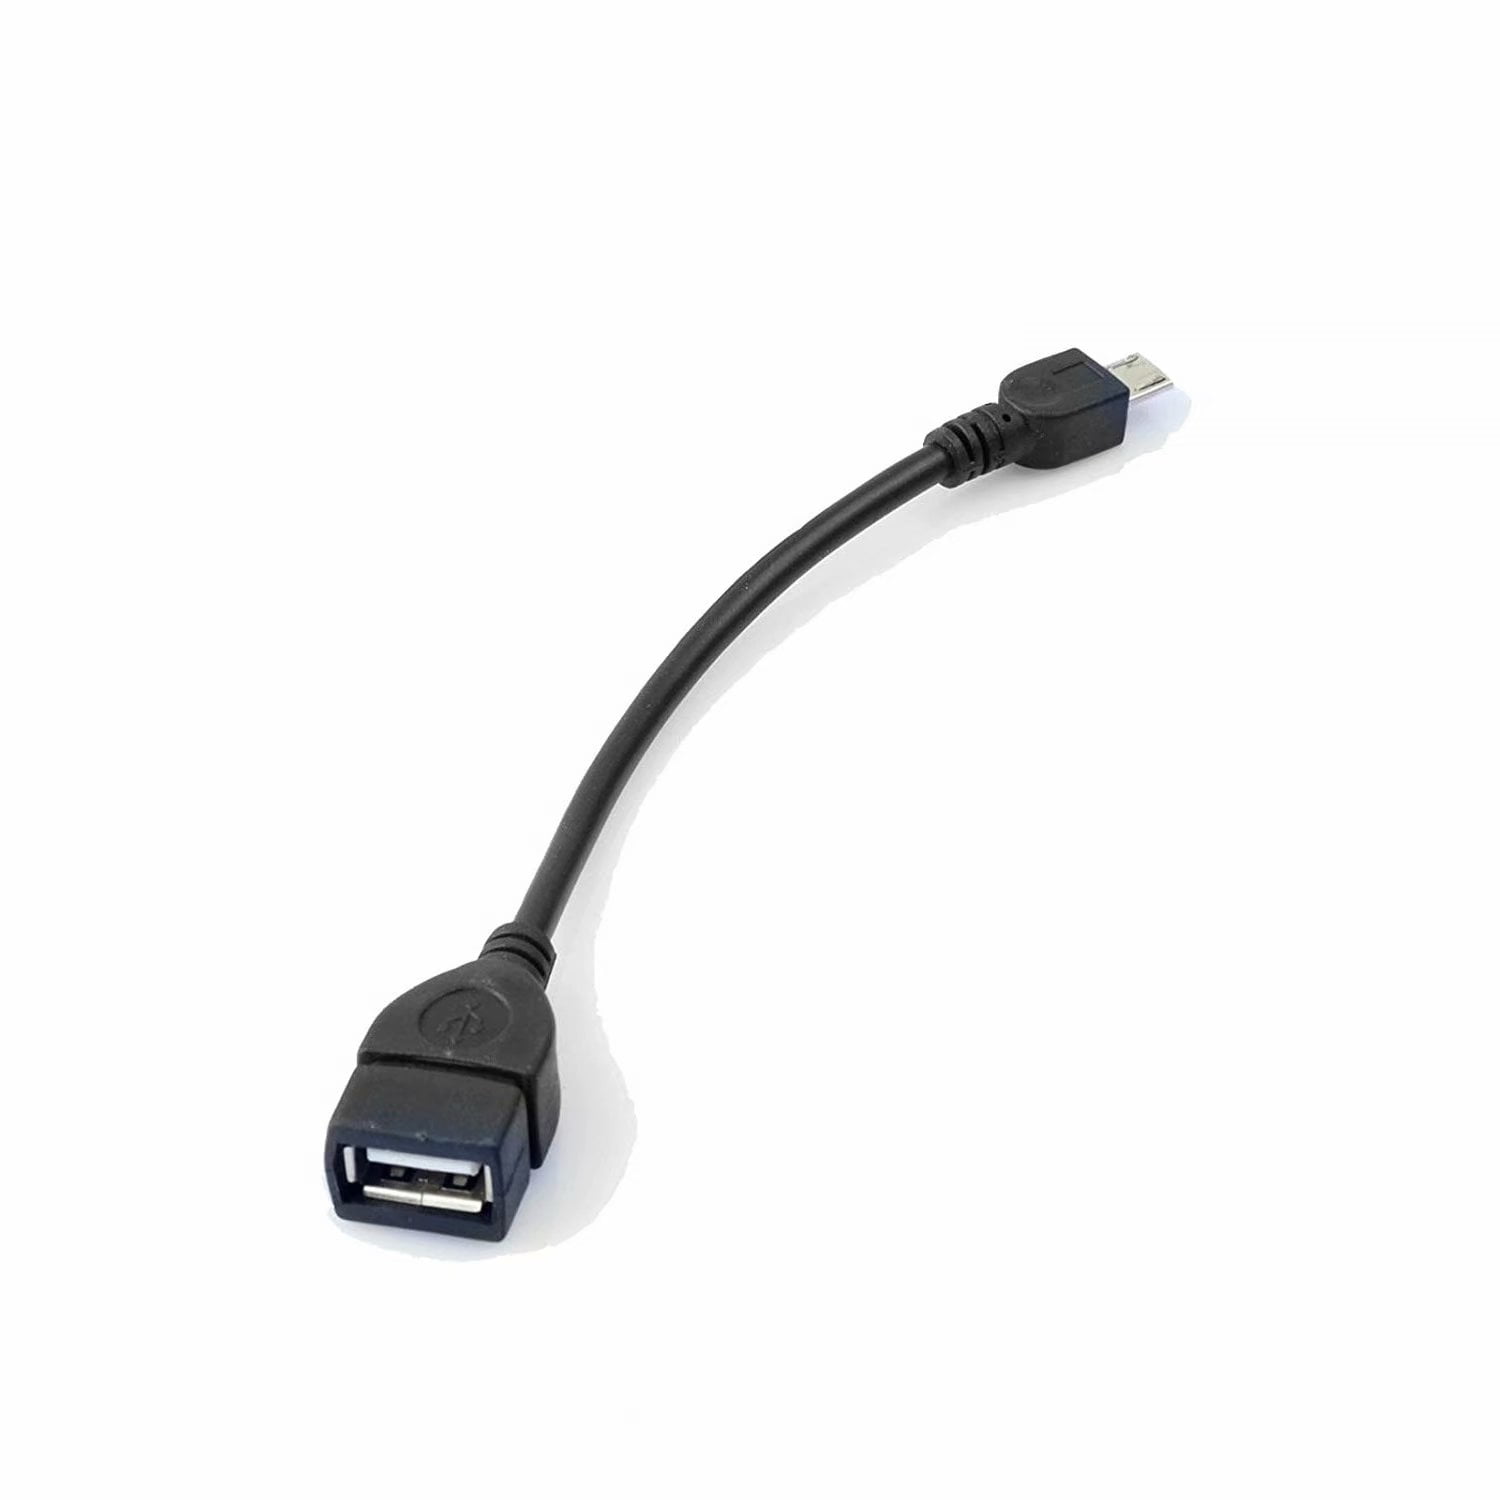 Cable Length: as Shown Cables Hot Selling 4 pcs Mini USB 2.0 OTG Host Adapter Black with USB Power for Cell Phone Tablet Sep24 